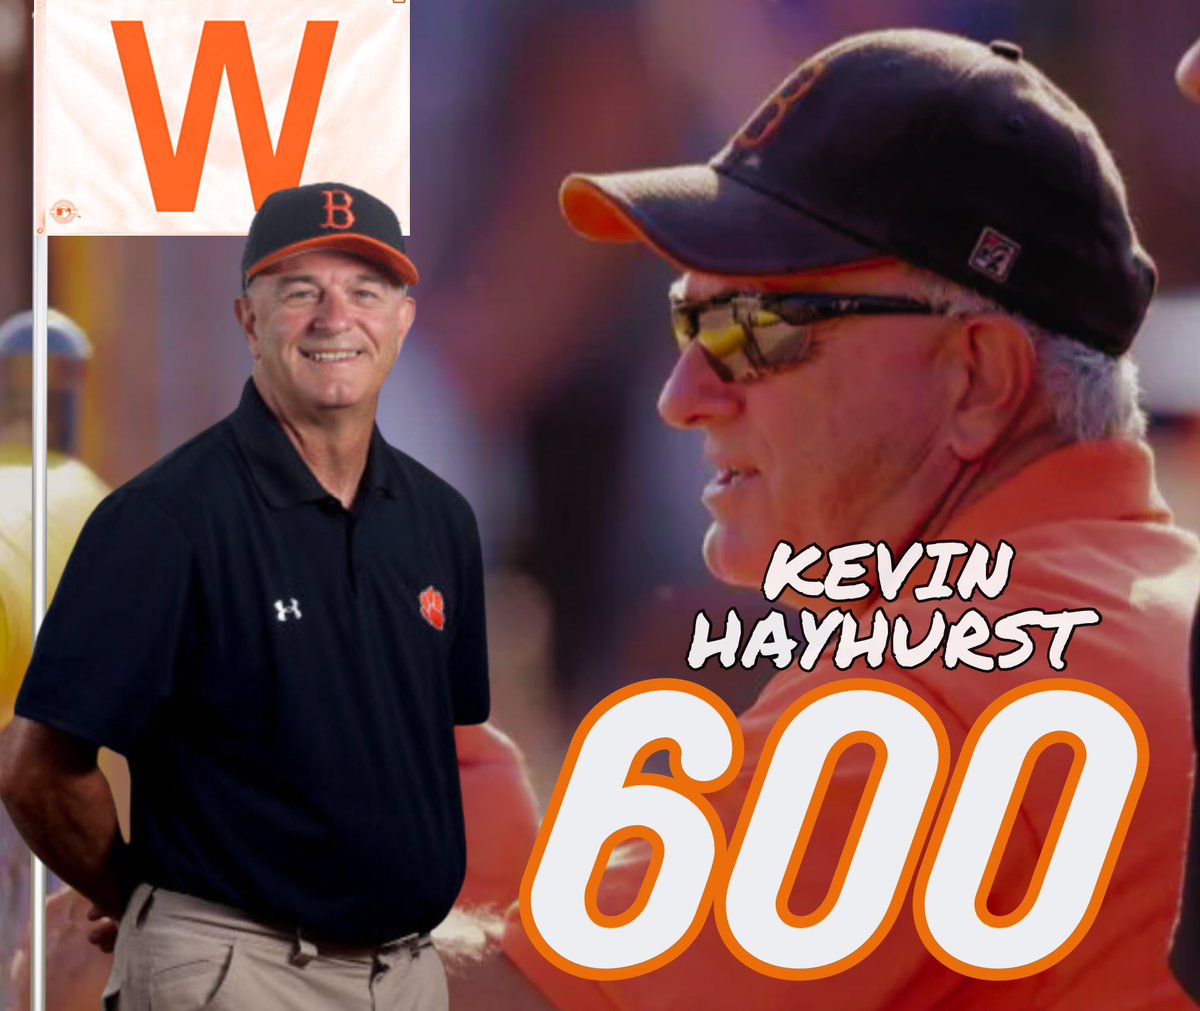 𝘾𝙤𝙣𝙜𝙧𝙖𝙩𝙪𝙡𝙖𝙩𝙞𝙤𝙣𝙨 𝘾𝙤𝙖𝙘𝙝 𝙃𝙖𝙮! With the two wins tonight, Coach Hayhurst has eclipsed the 600 career win plateau. @TDJsports @JeffVorva